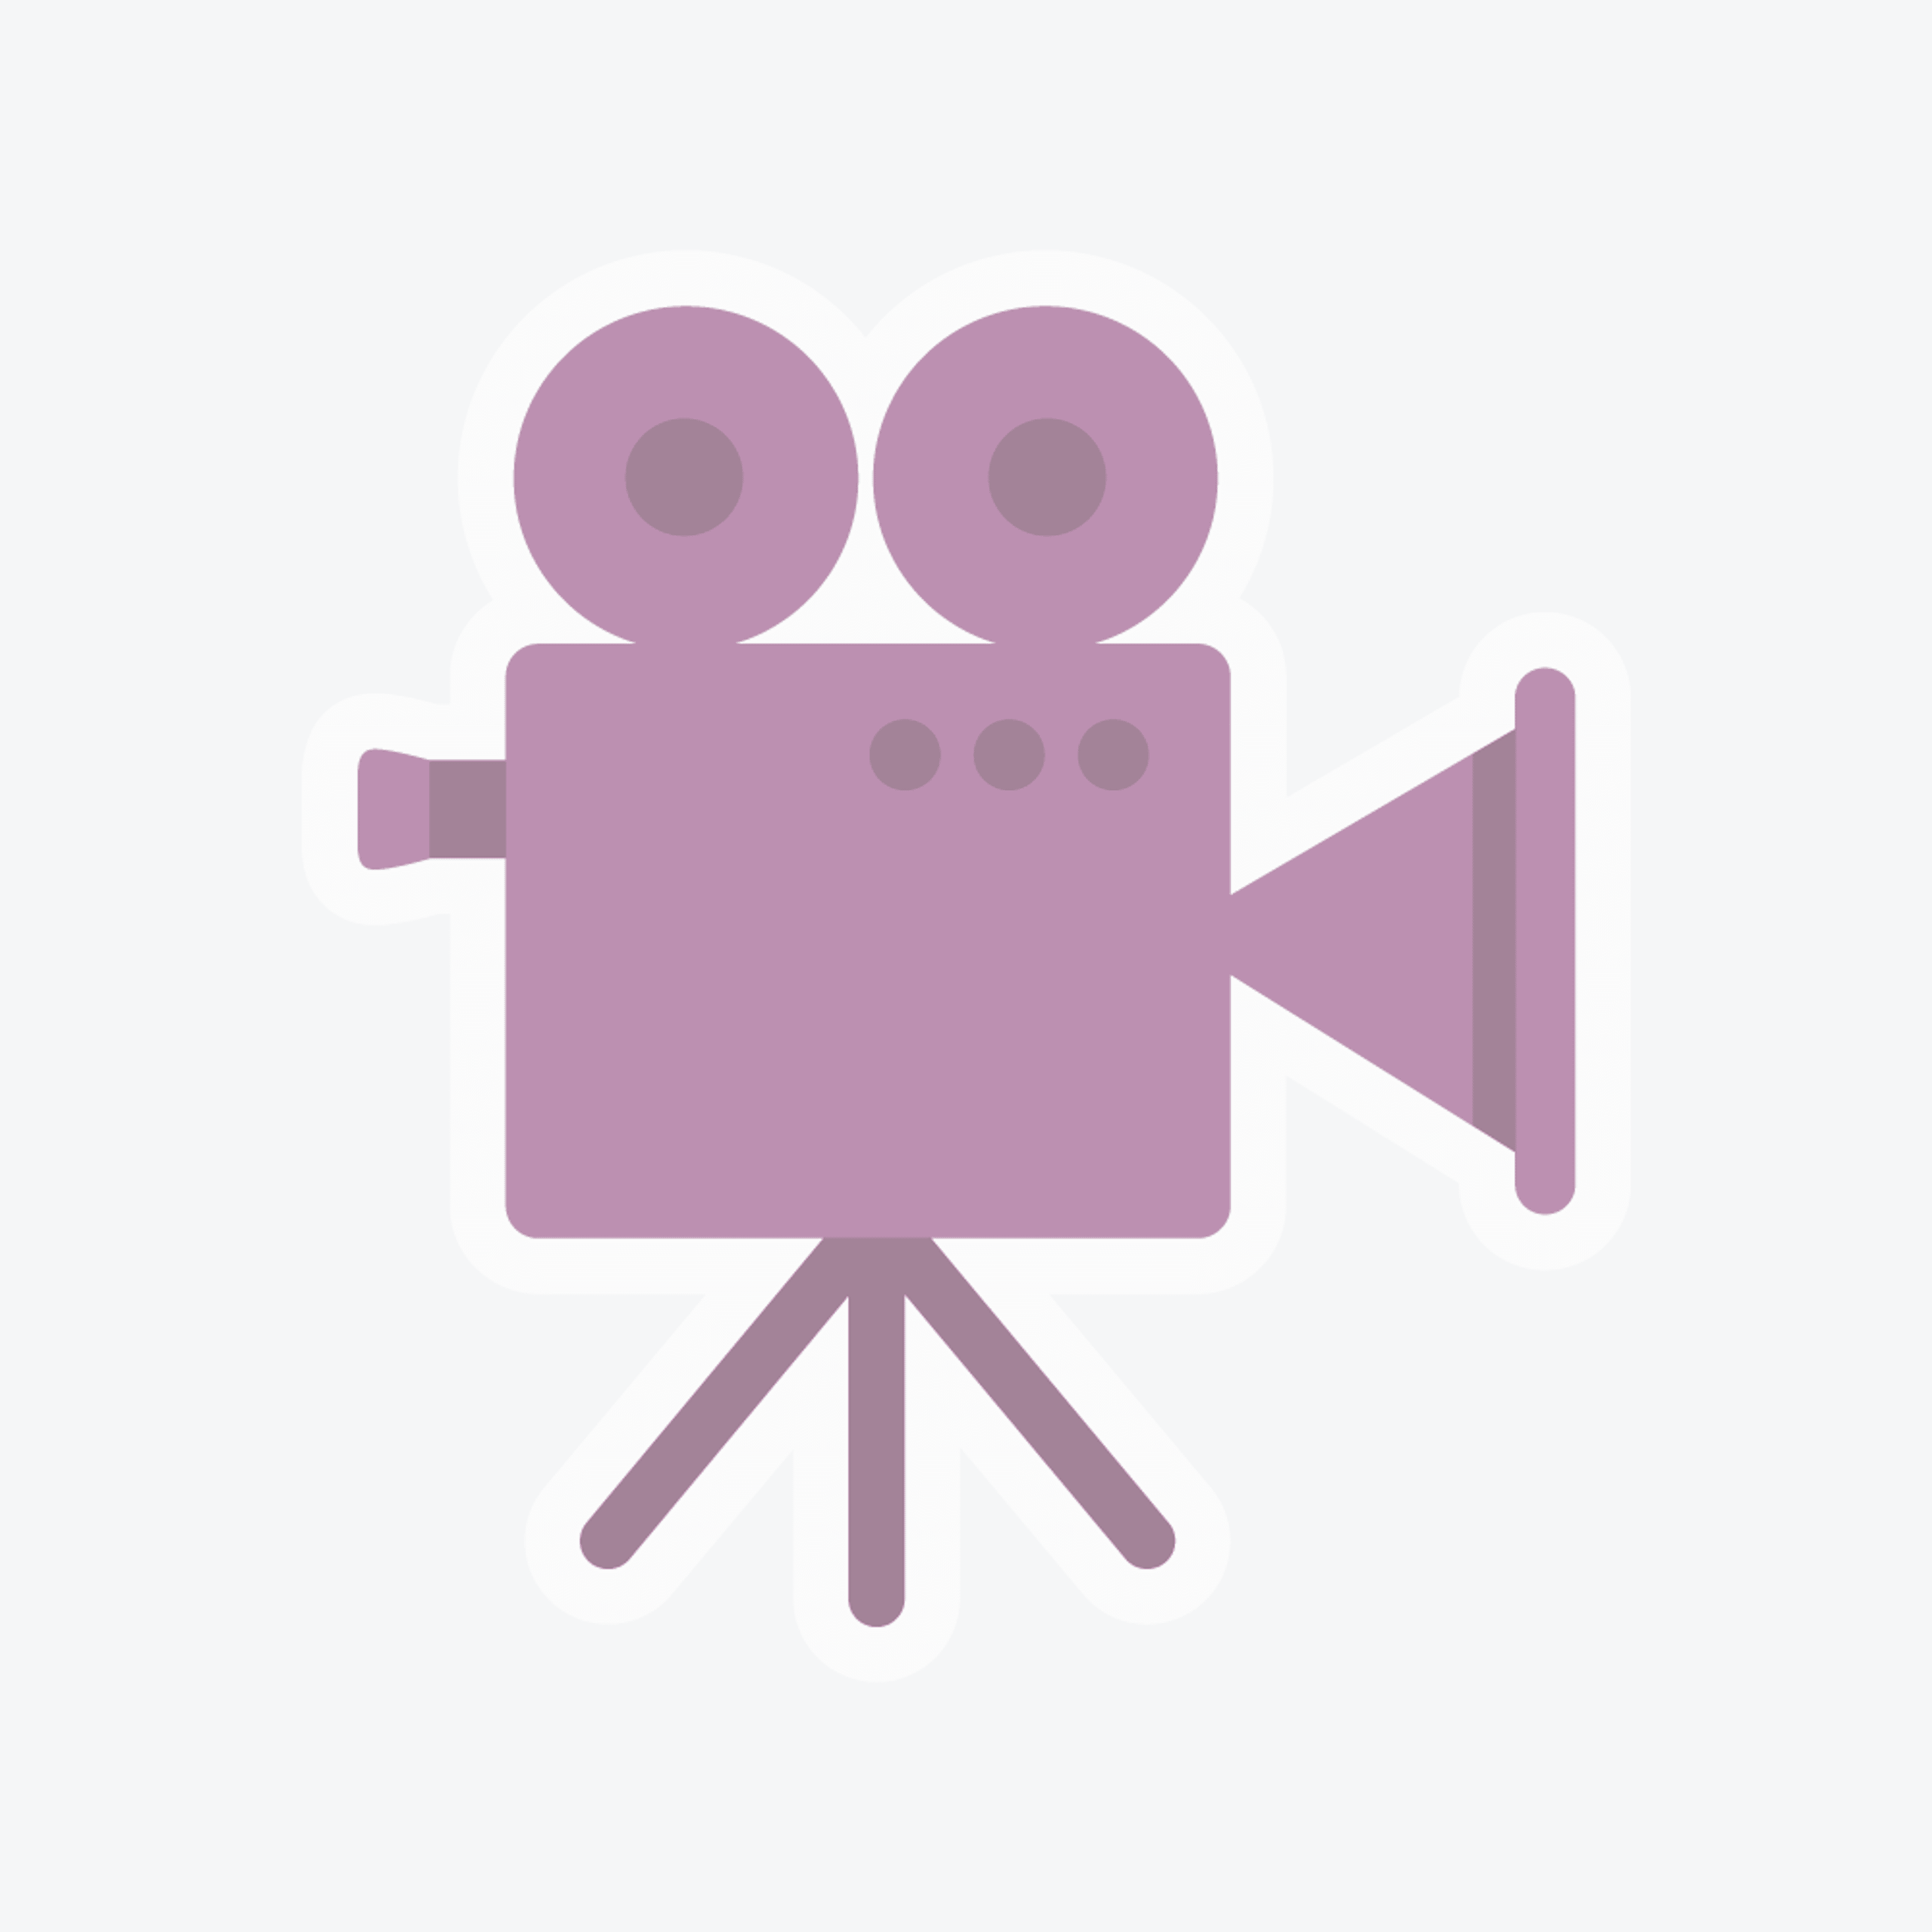 Videographer Needed To Shoot Funny Videos For INSTAGRAM